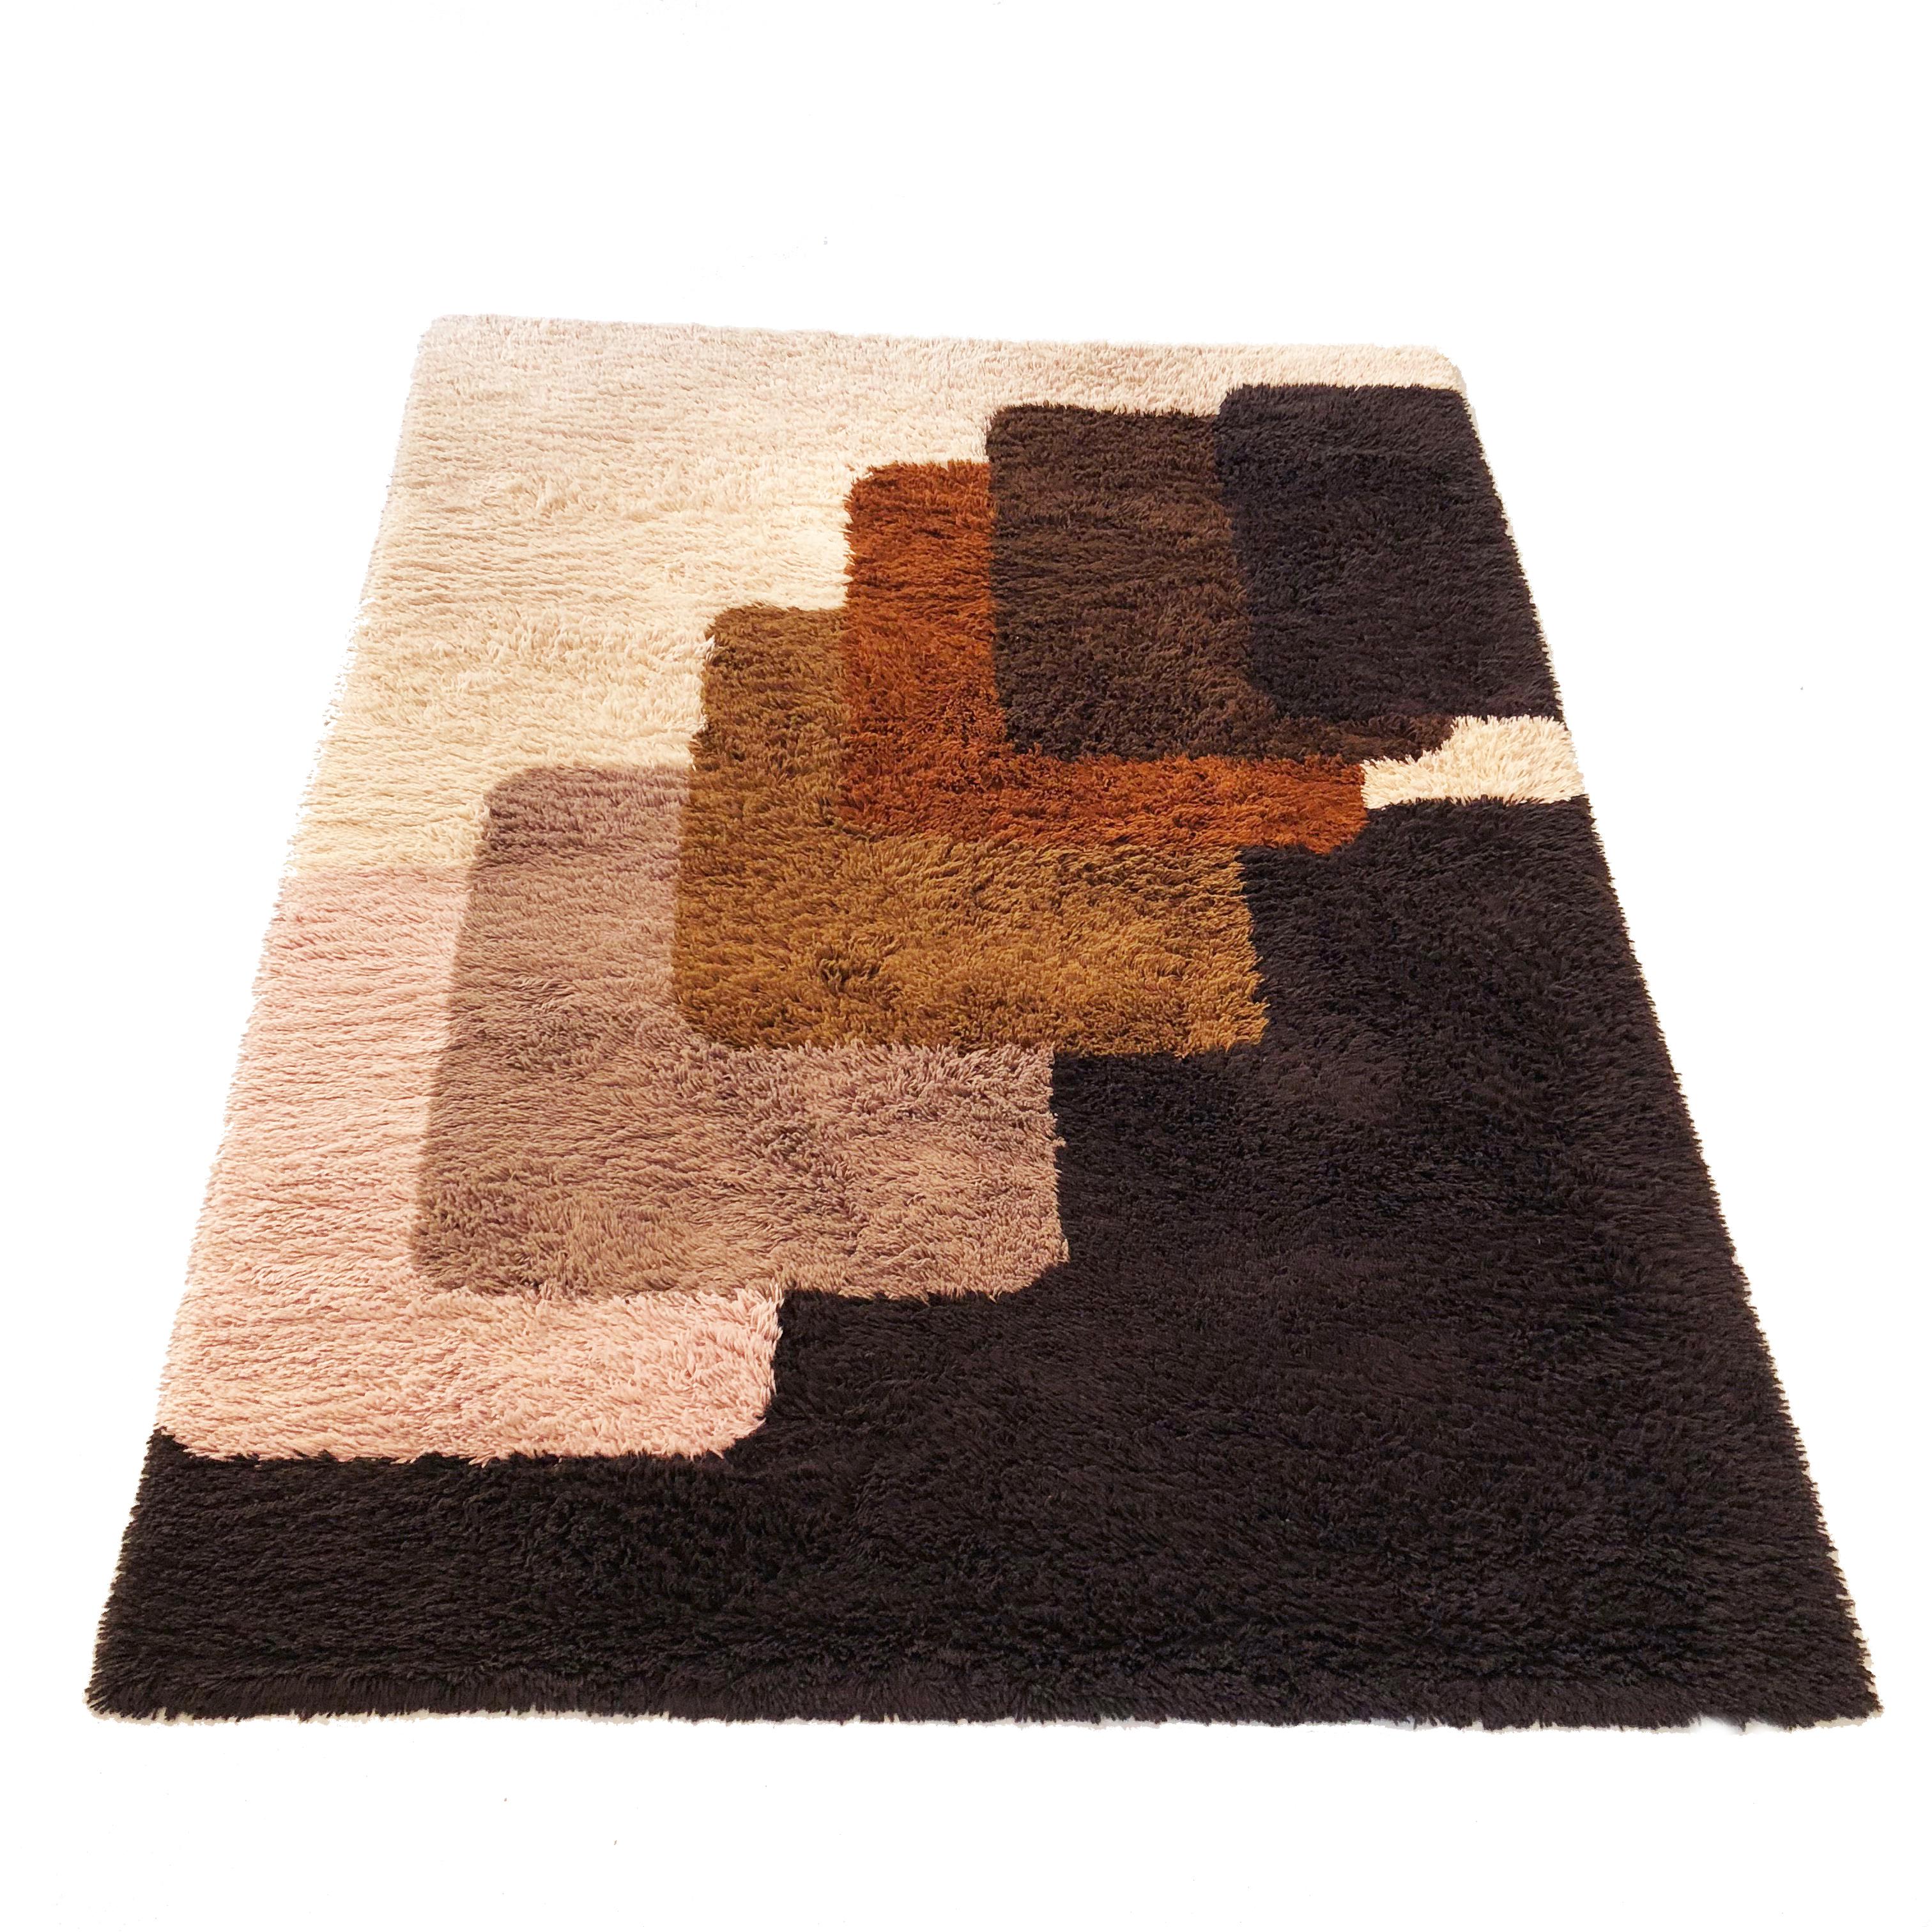 Article:

Original huge high pile rug


Decade:

1970s


Origin:

Netherlands


Producer:

Desso



Description:

This rug is a great example of 1970s pop art interior. Made in high quality weaving technique. This high quality